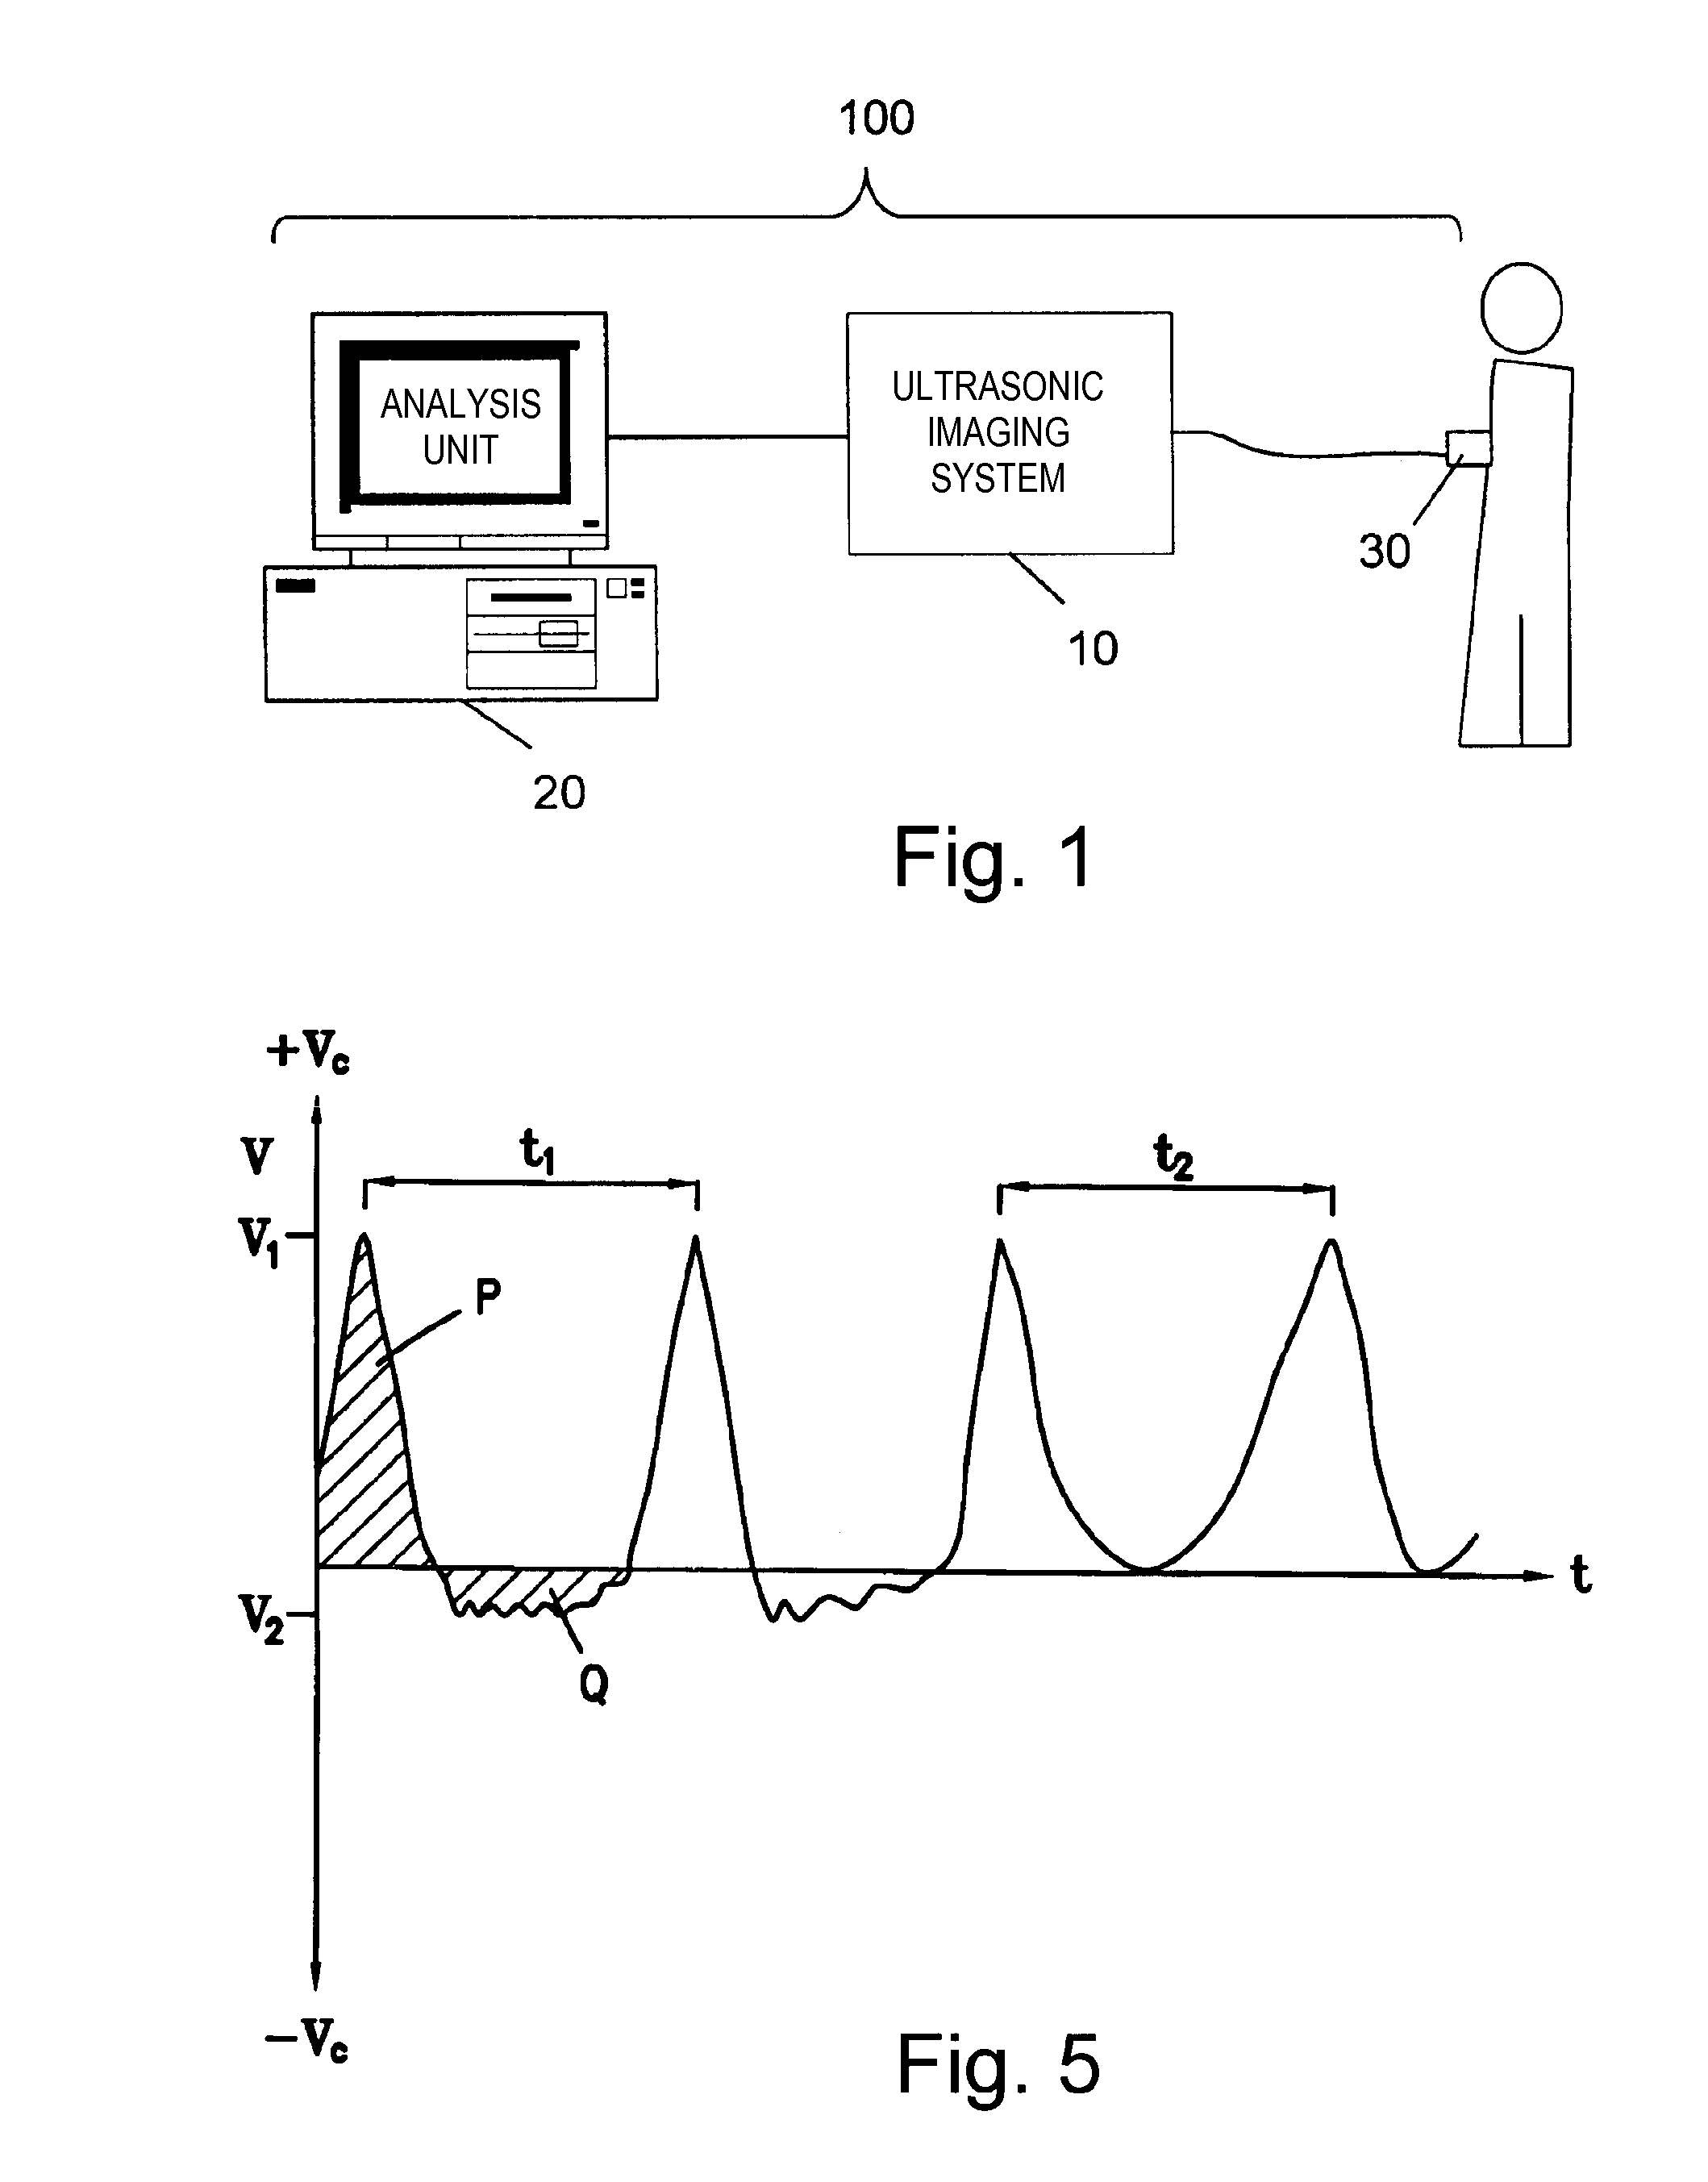 Apparatus, system and method for evaluation of esophageal function